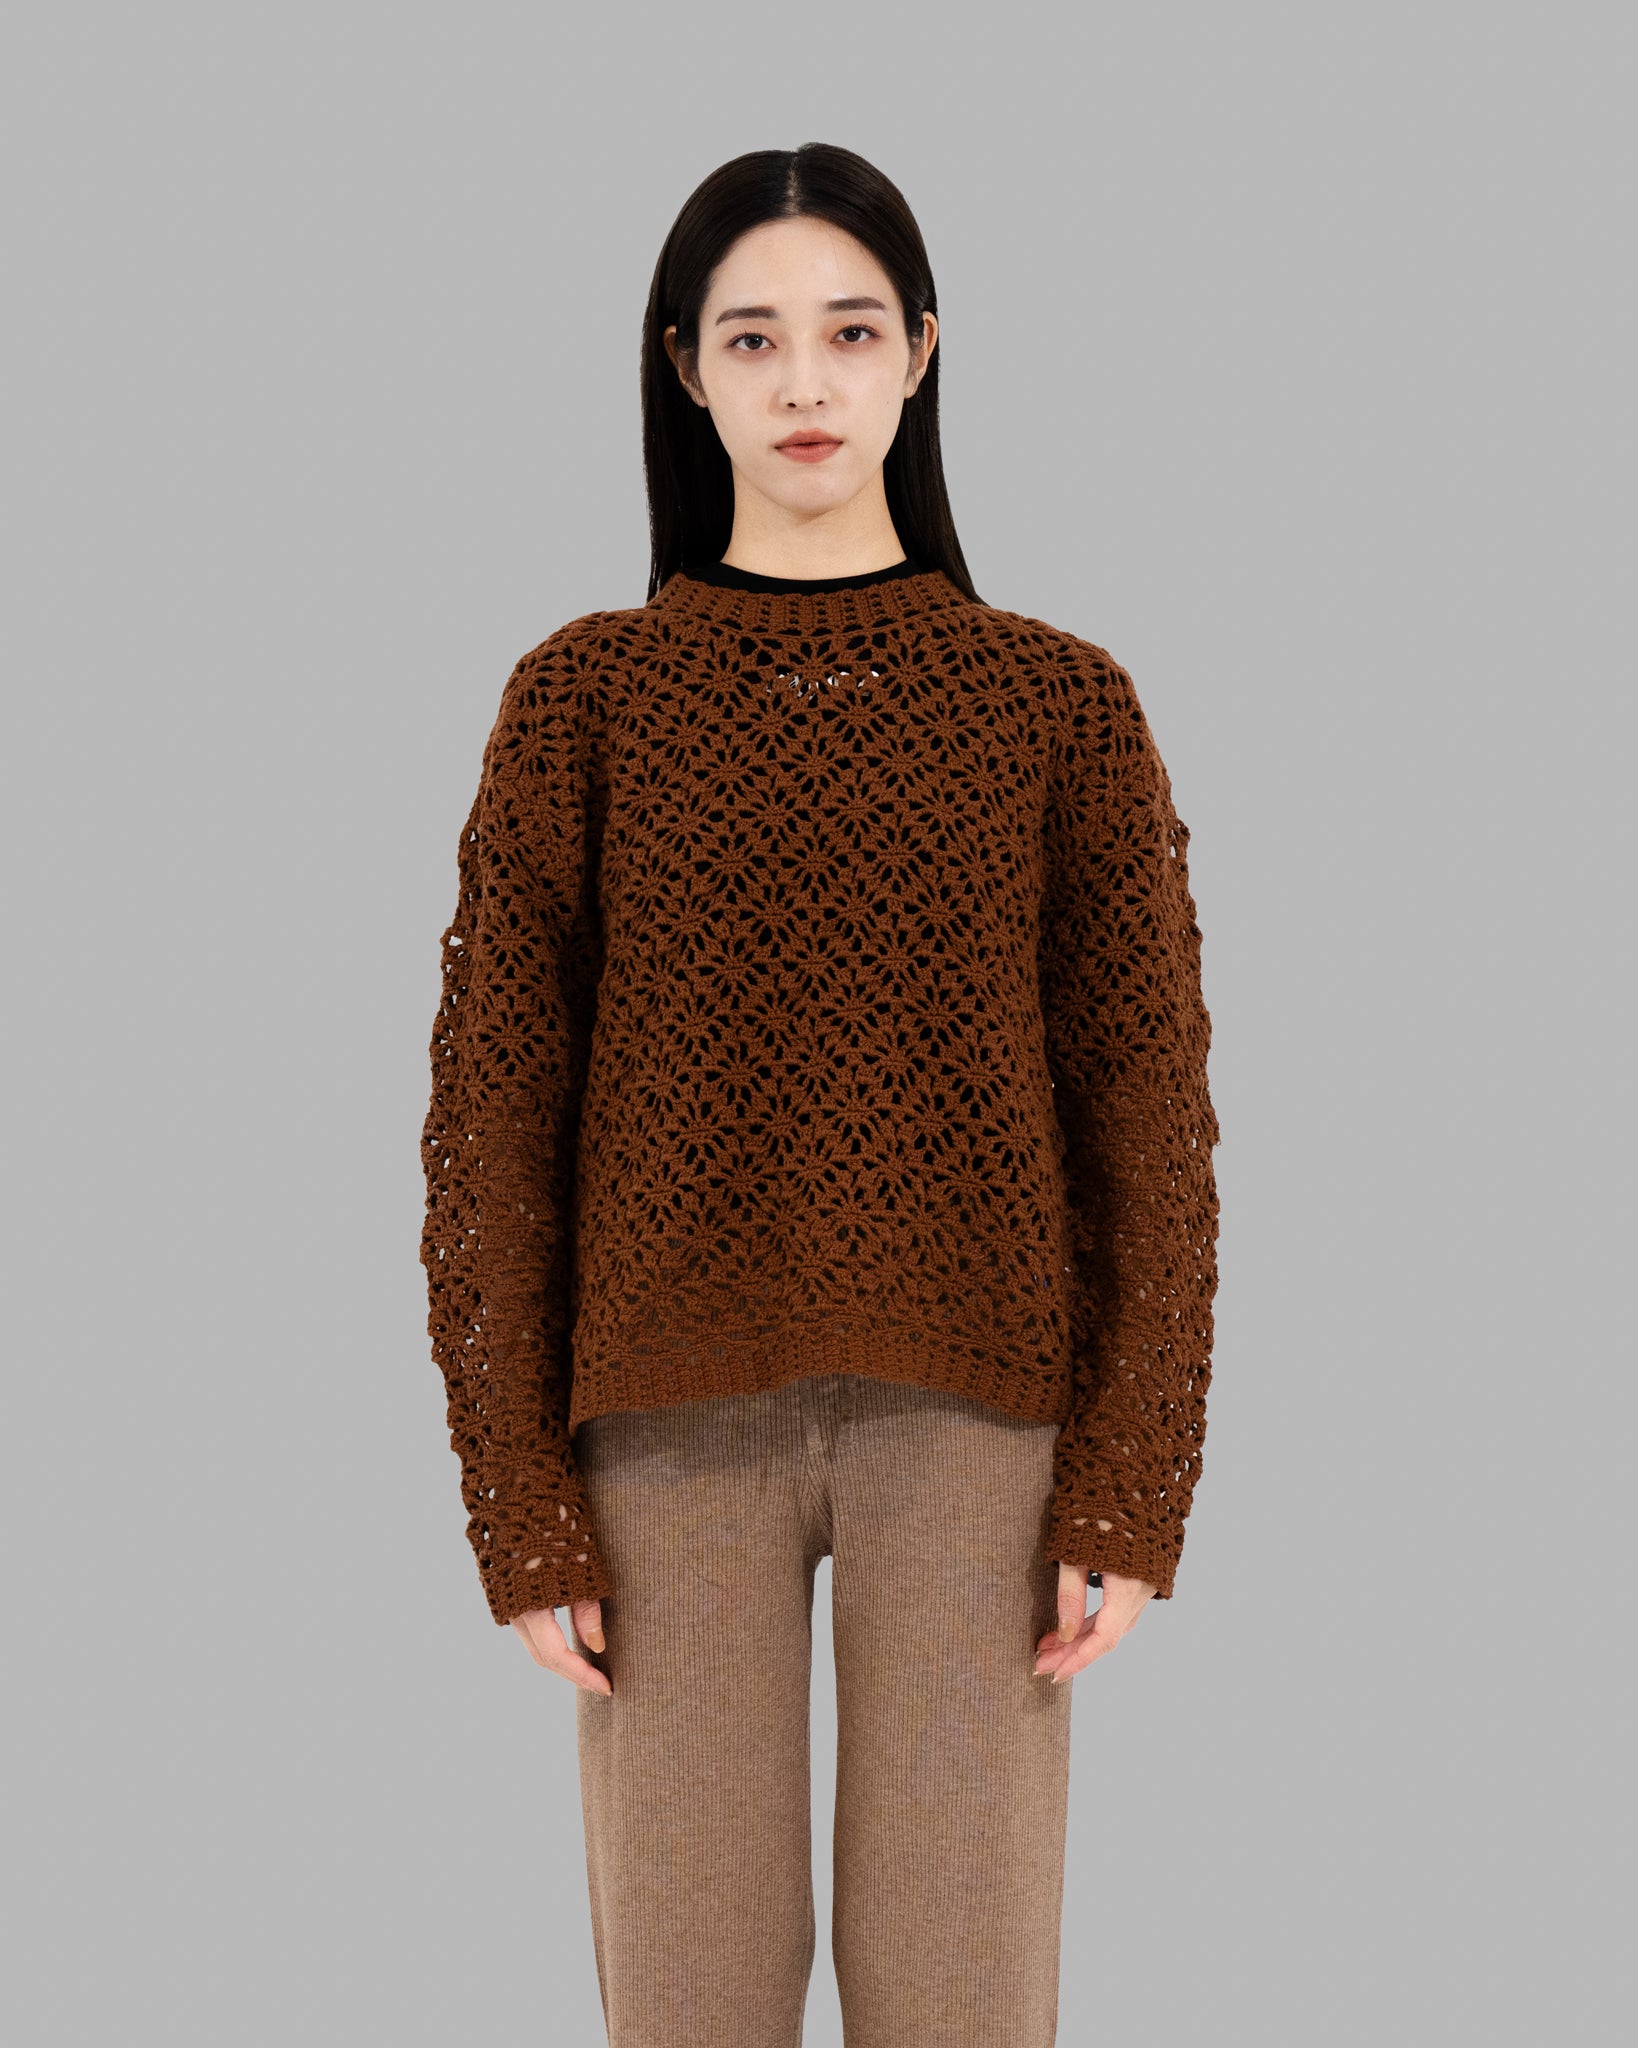 Crochet Hand Knit Pullover Sweater -Brown